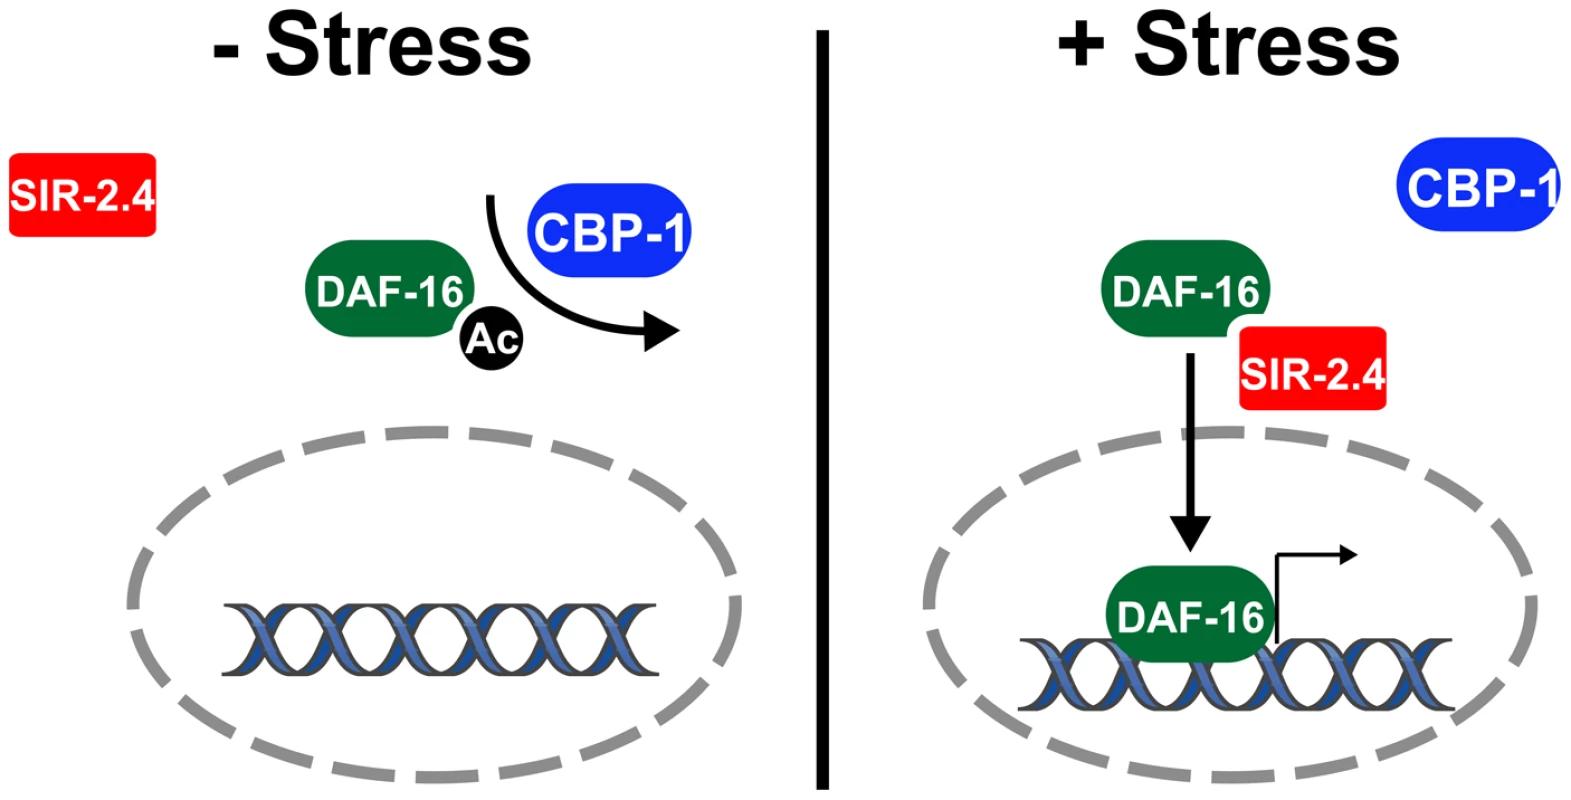 Model: SIR-2.4 promotes DAF-16 deacetylation and function during stress.